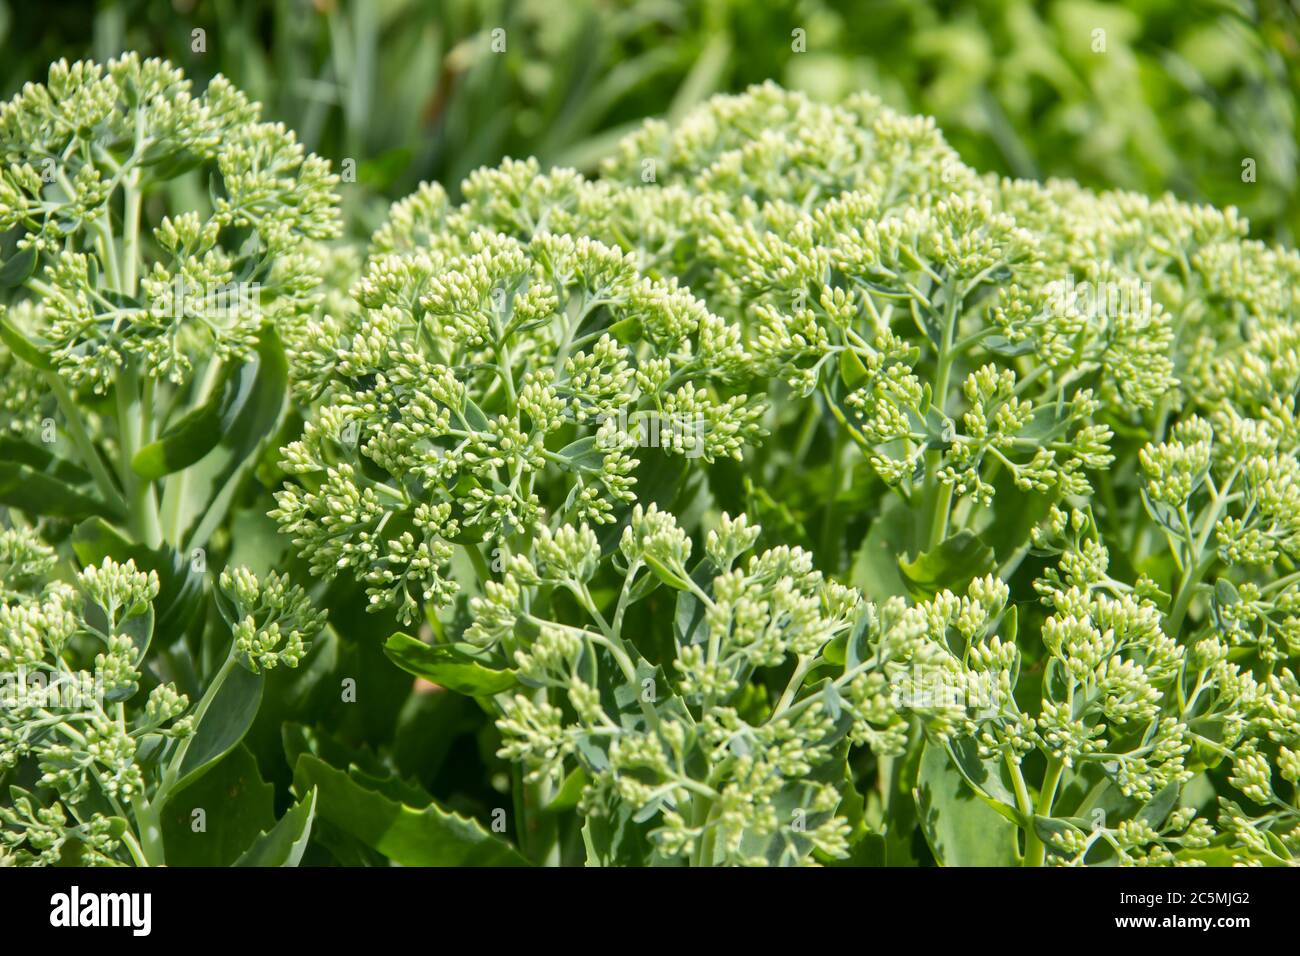 Large plant with fleshy green leaves, stems and inflorescences. Blooming Sedum spectabile 'Brilliant' stonecrop prominent in the summer season. Stock Photo